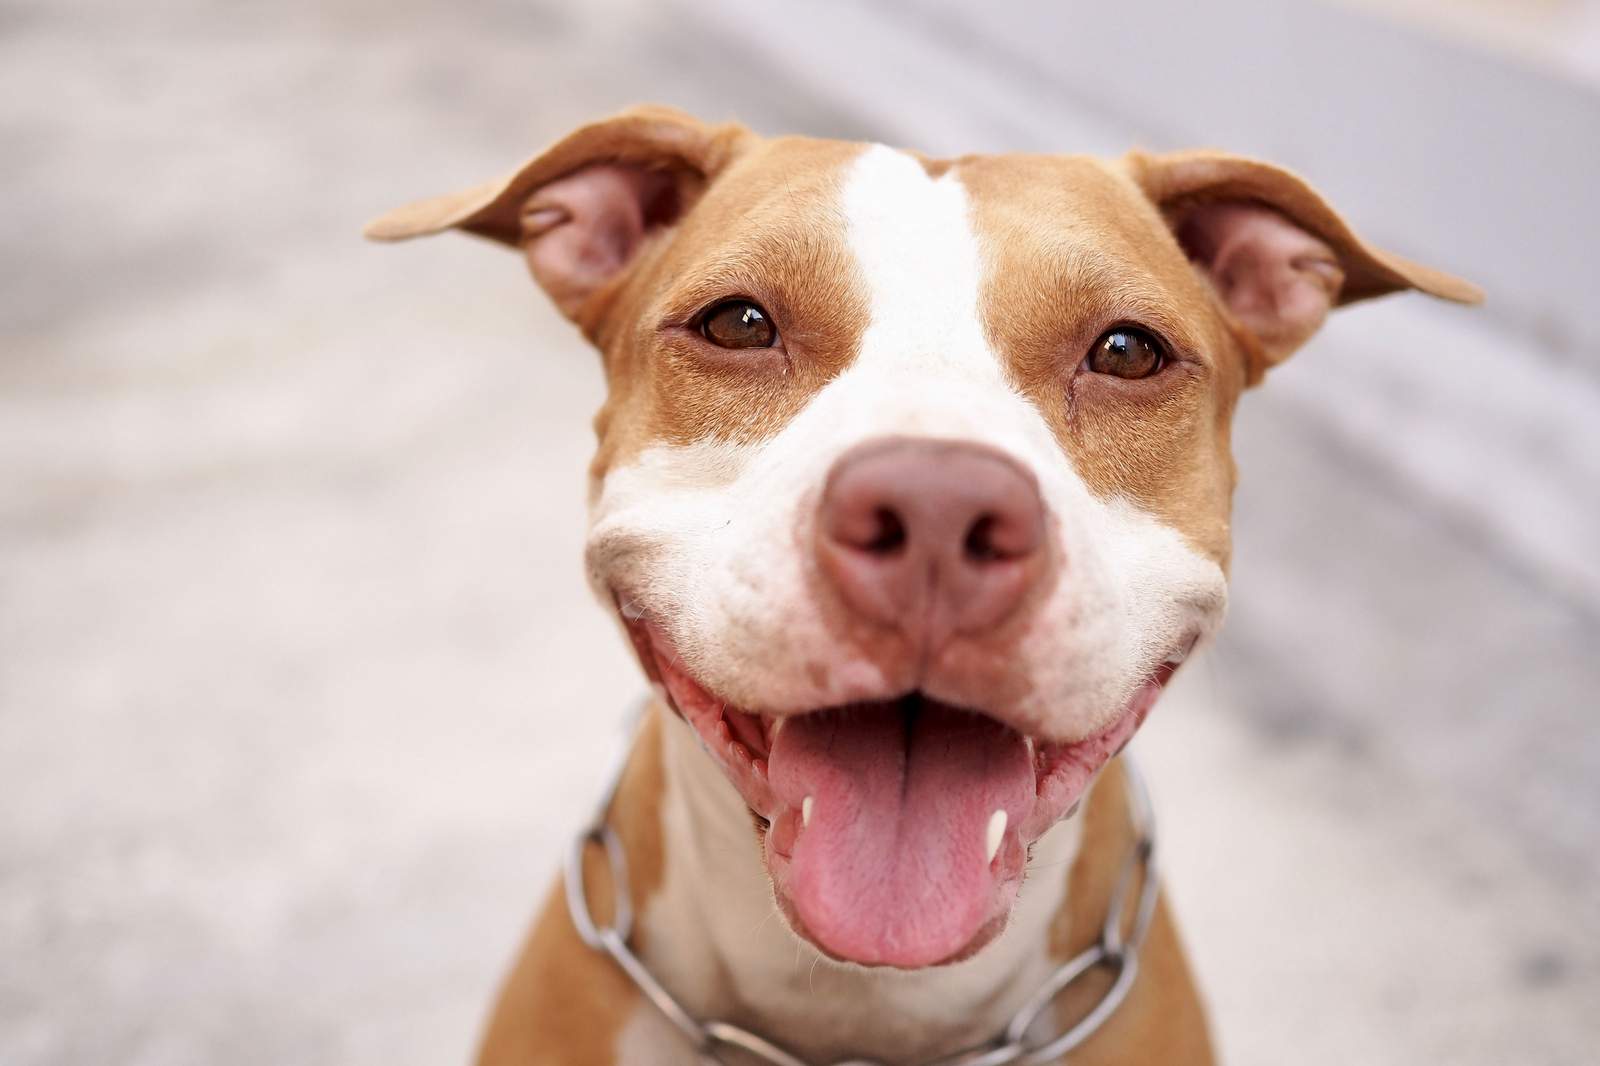 Denver voters repeal 30-year-old pit bull ban